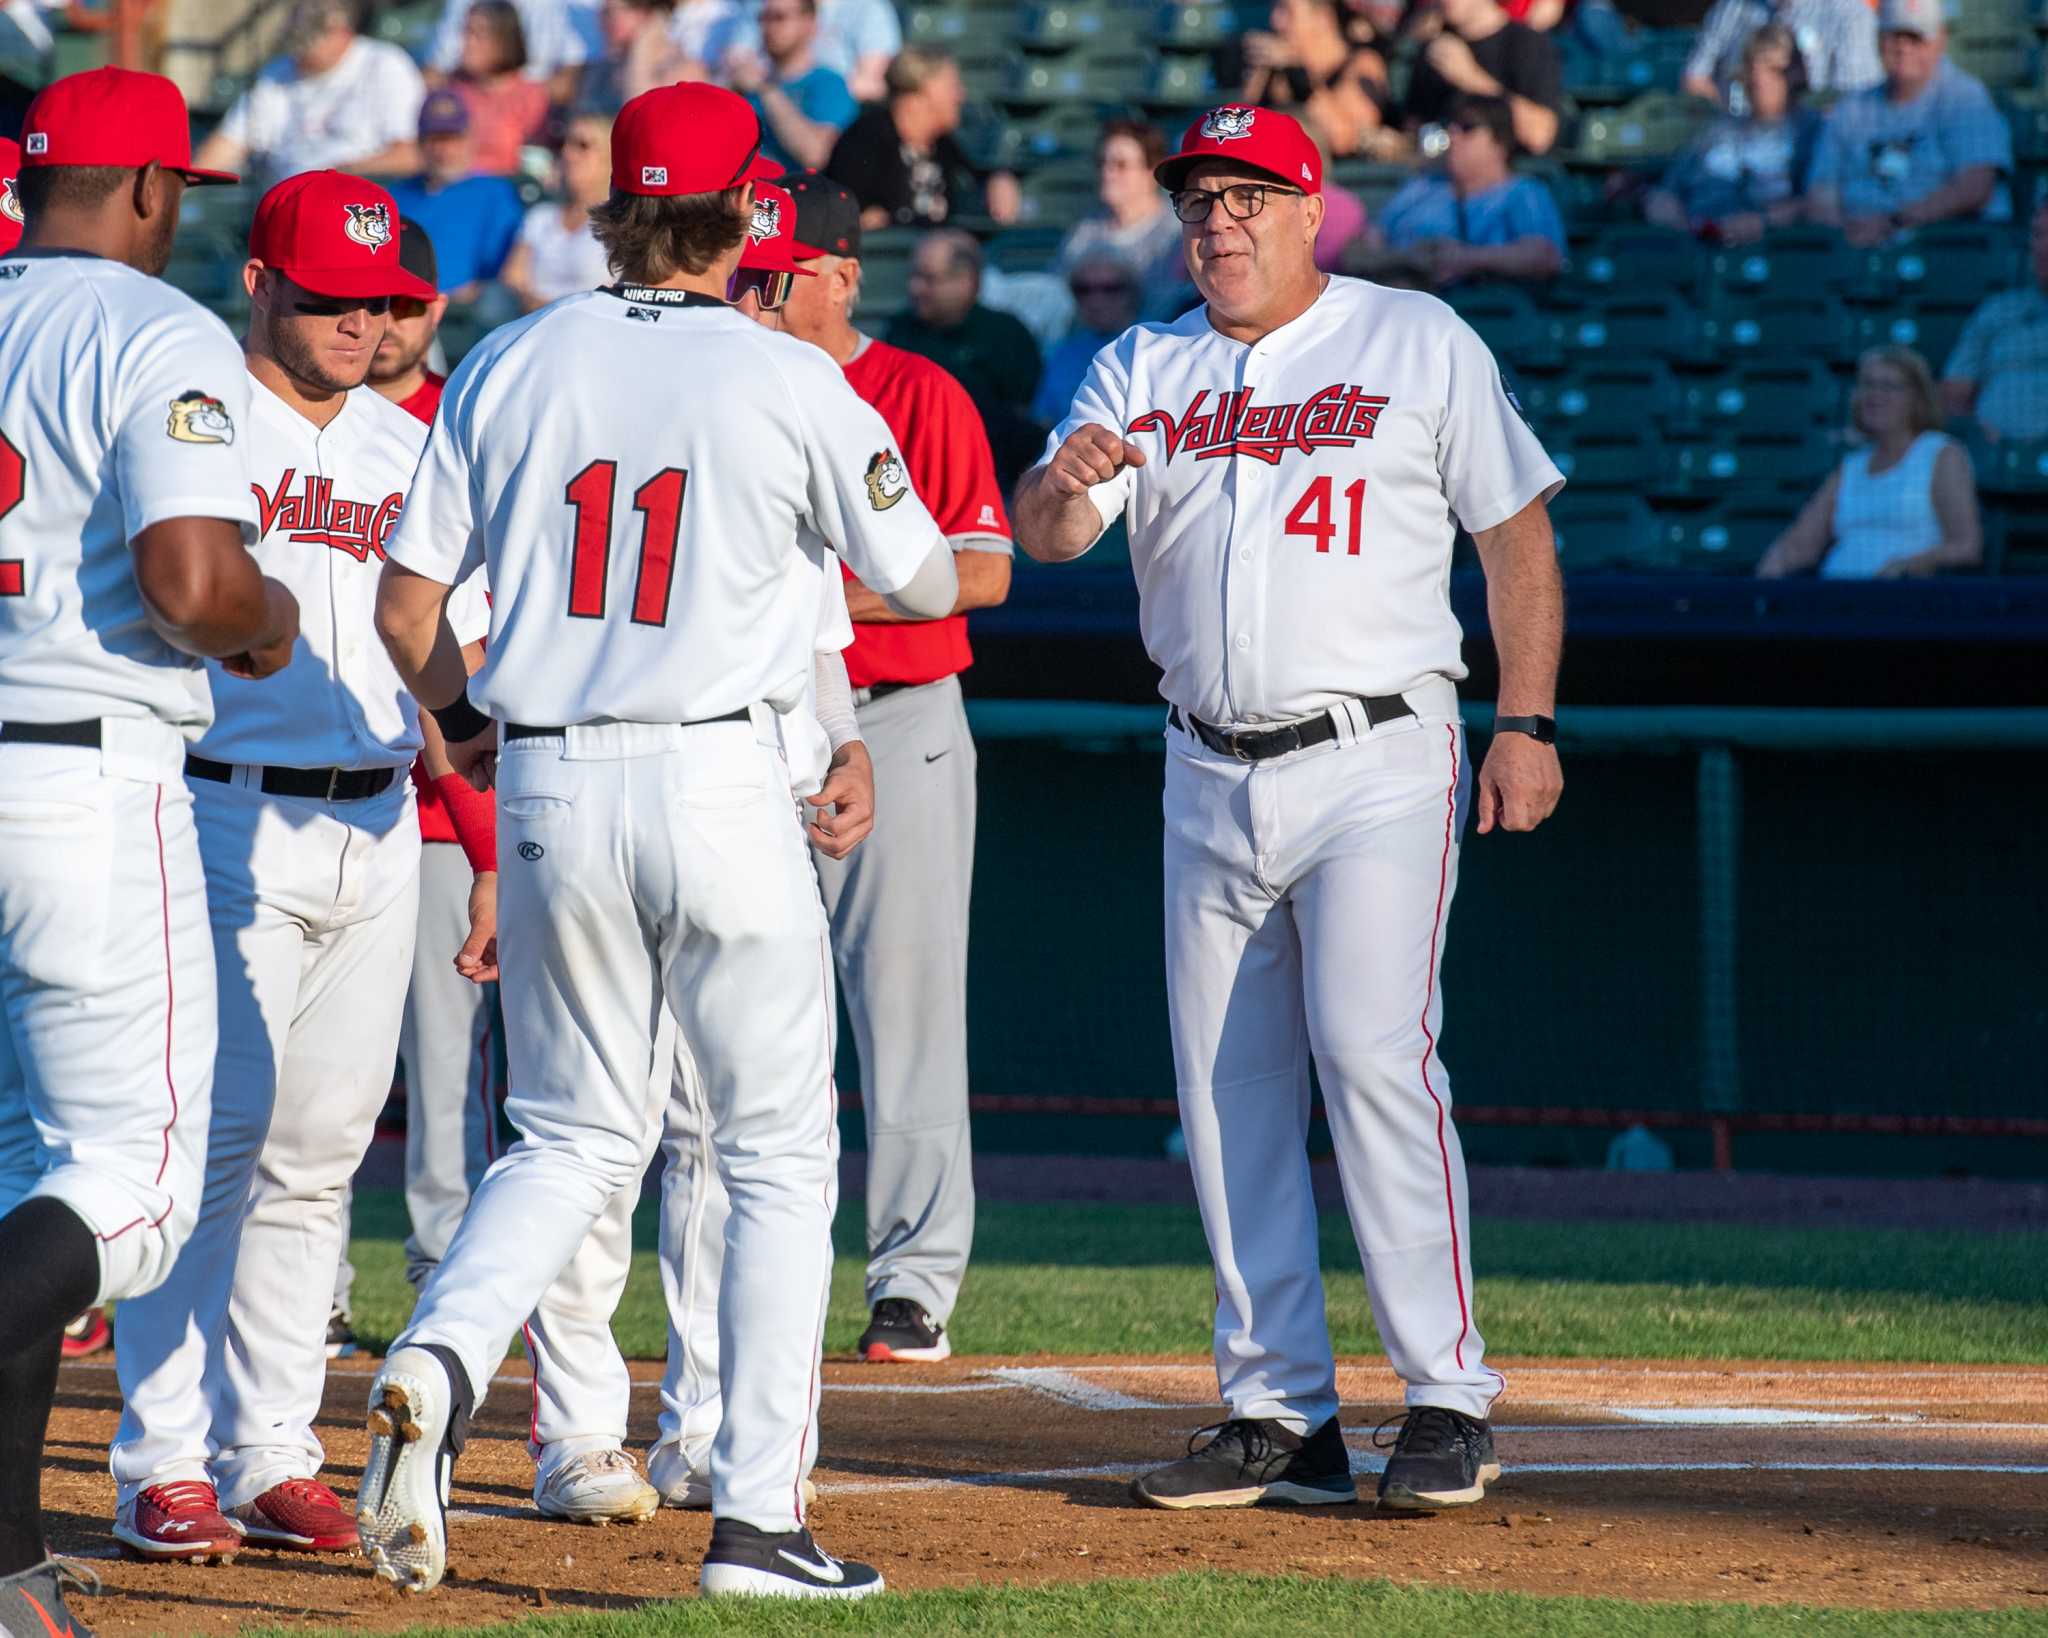 ValleyCats manager Pete Incaviglia 'thoroughly embarrassed' after